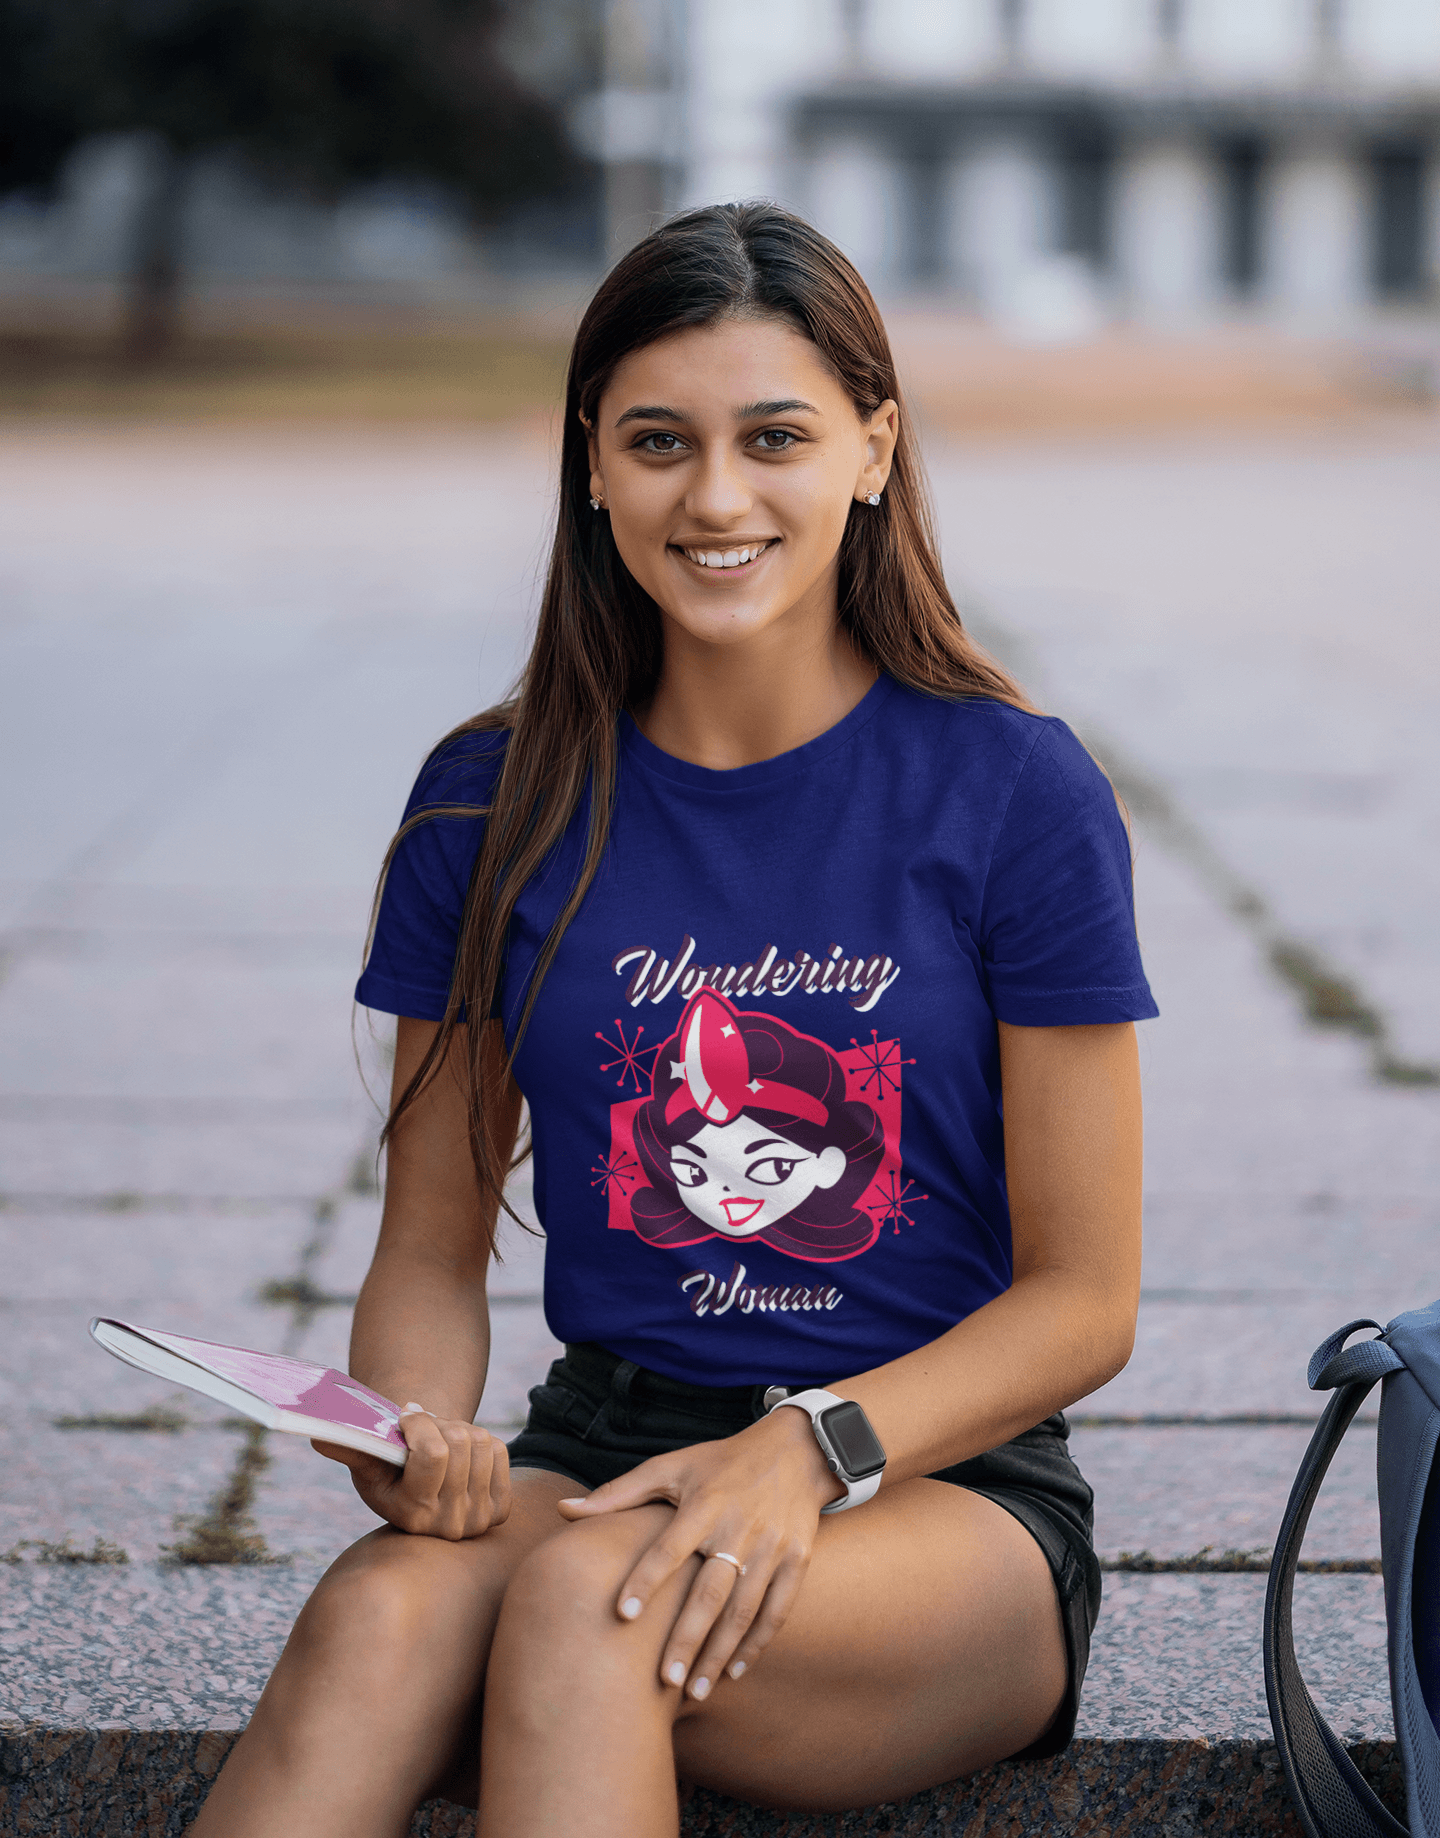 Wondering Woman T-Shirt - The Accessorys Official